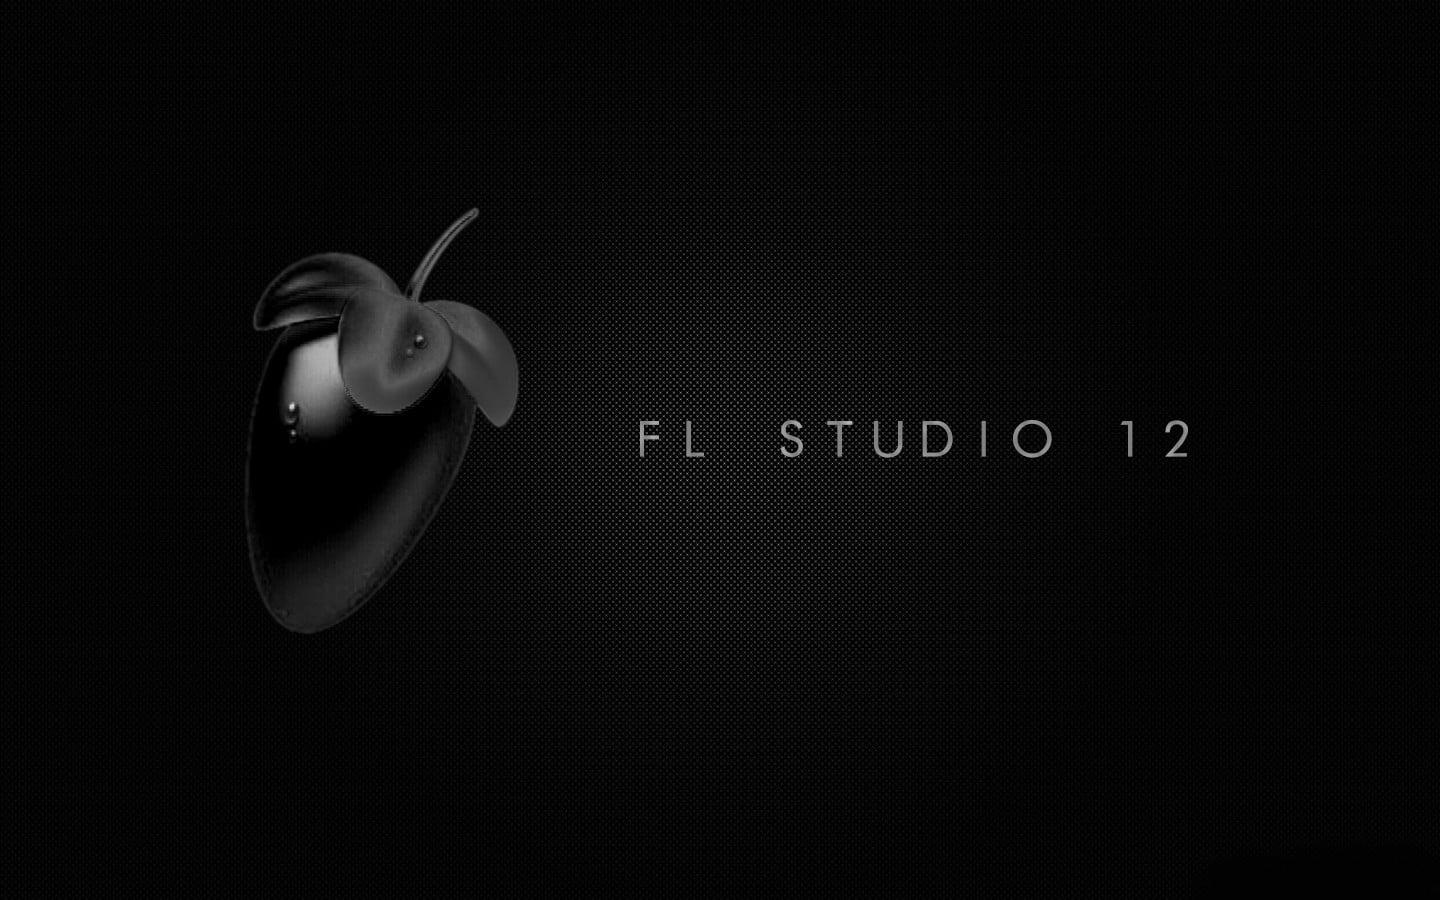 Black background with FL Studio 12 text overlay, text